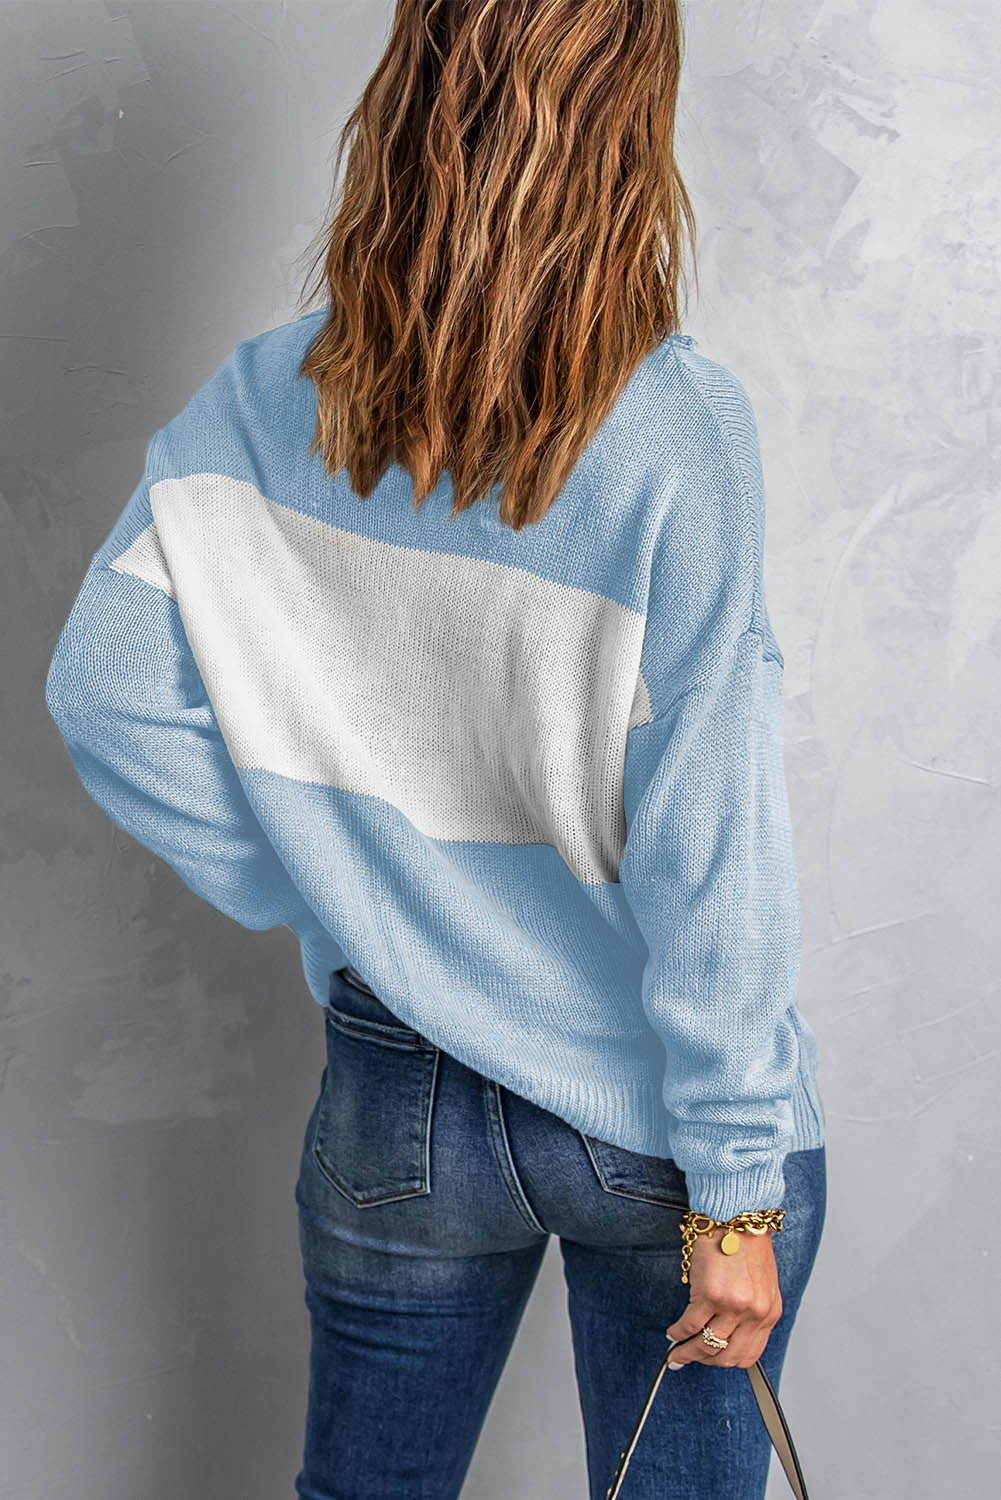 Blue Colorblock Turtleneck Loose Knitted Sweater